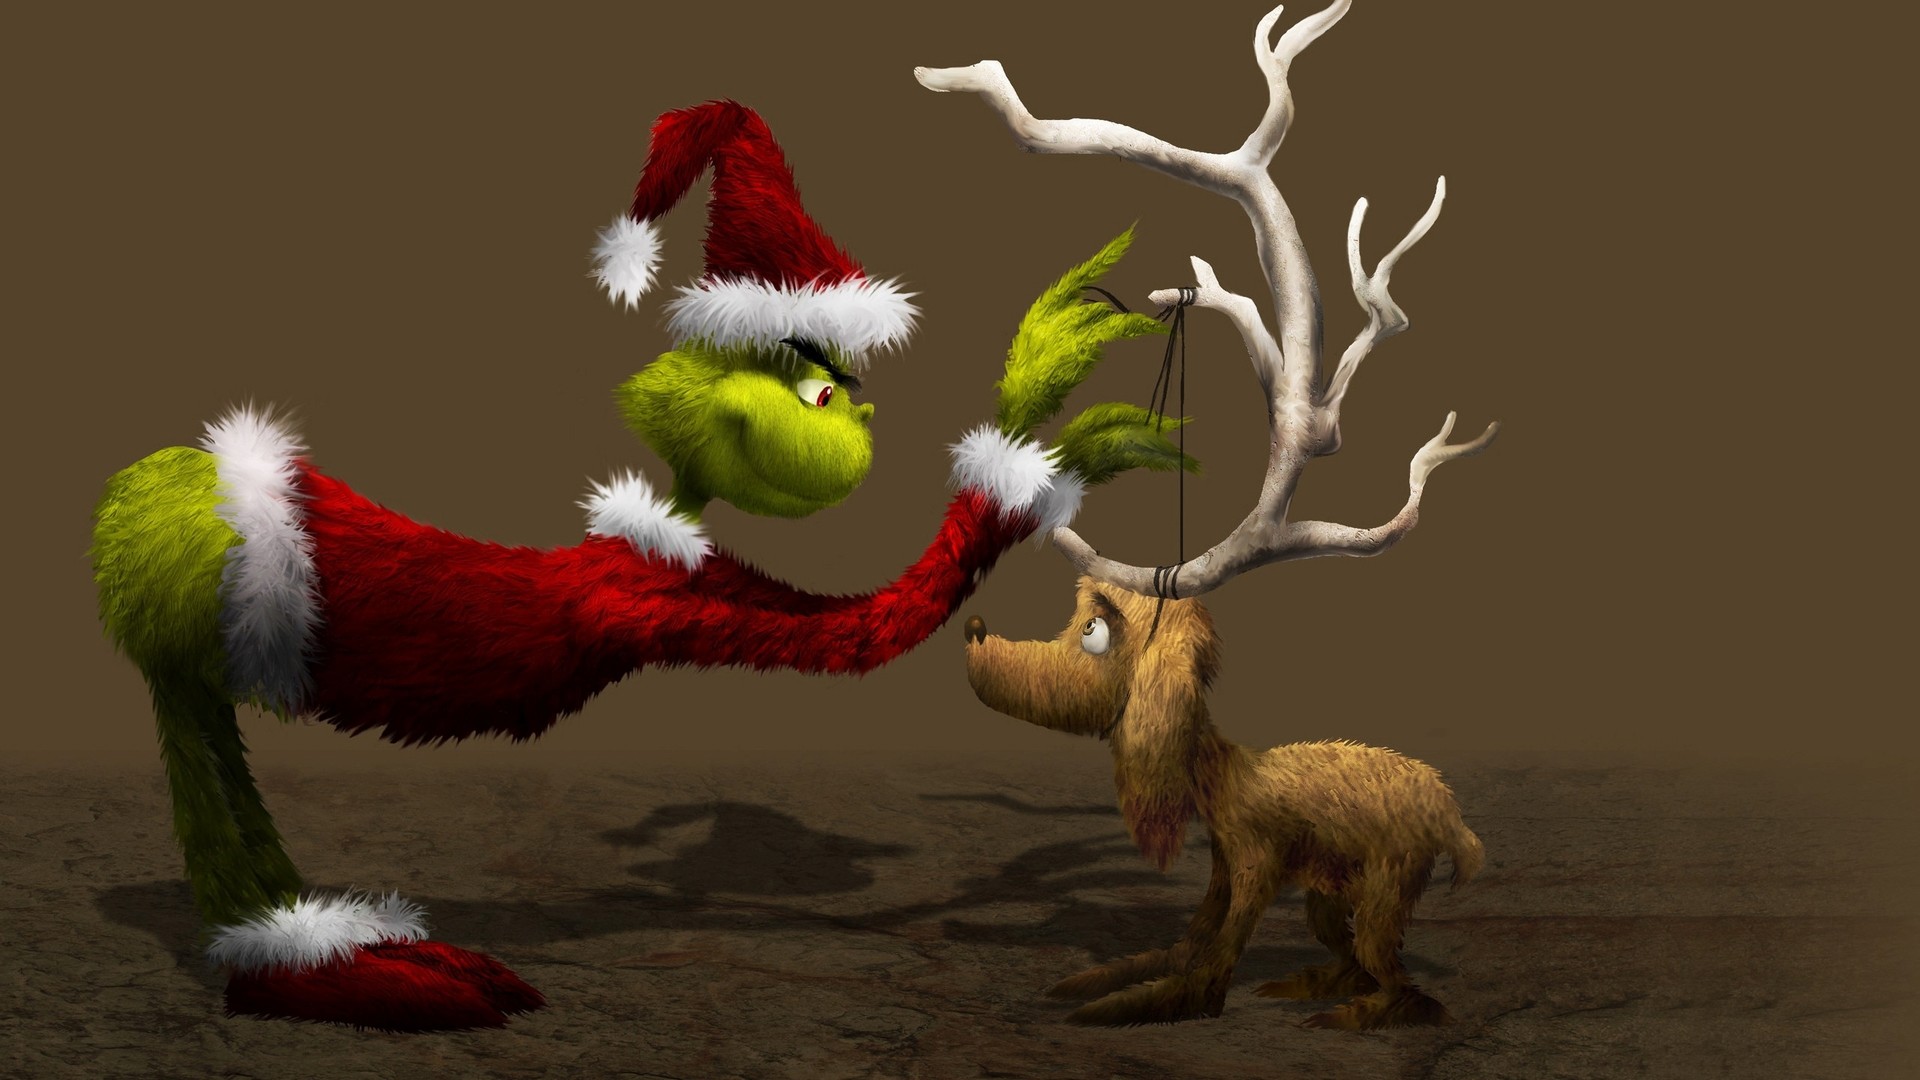 1920x1080 Download The Grinch wallpaper 